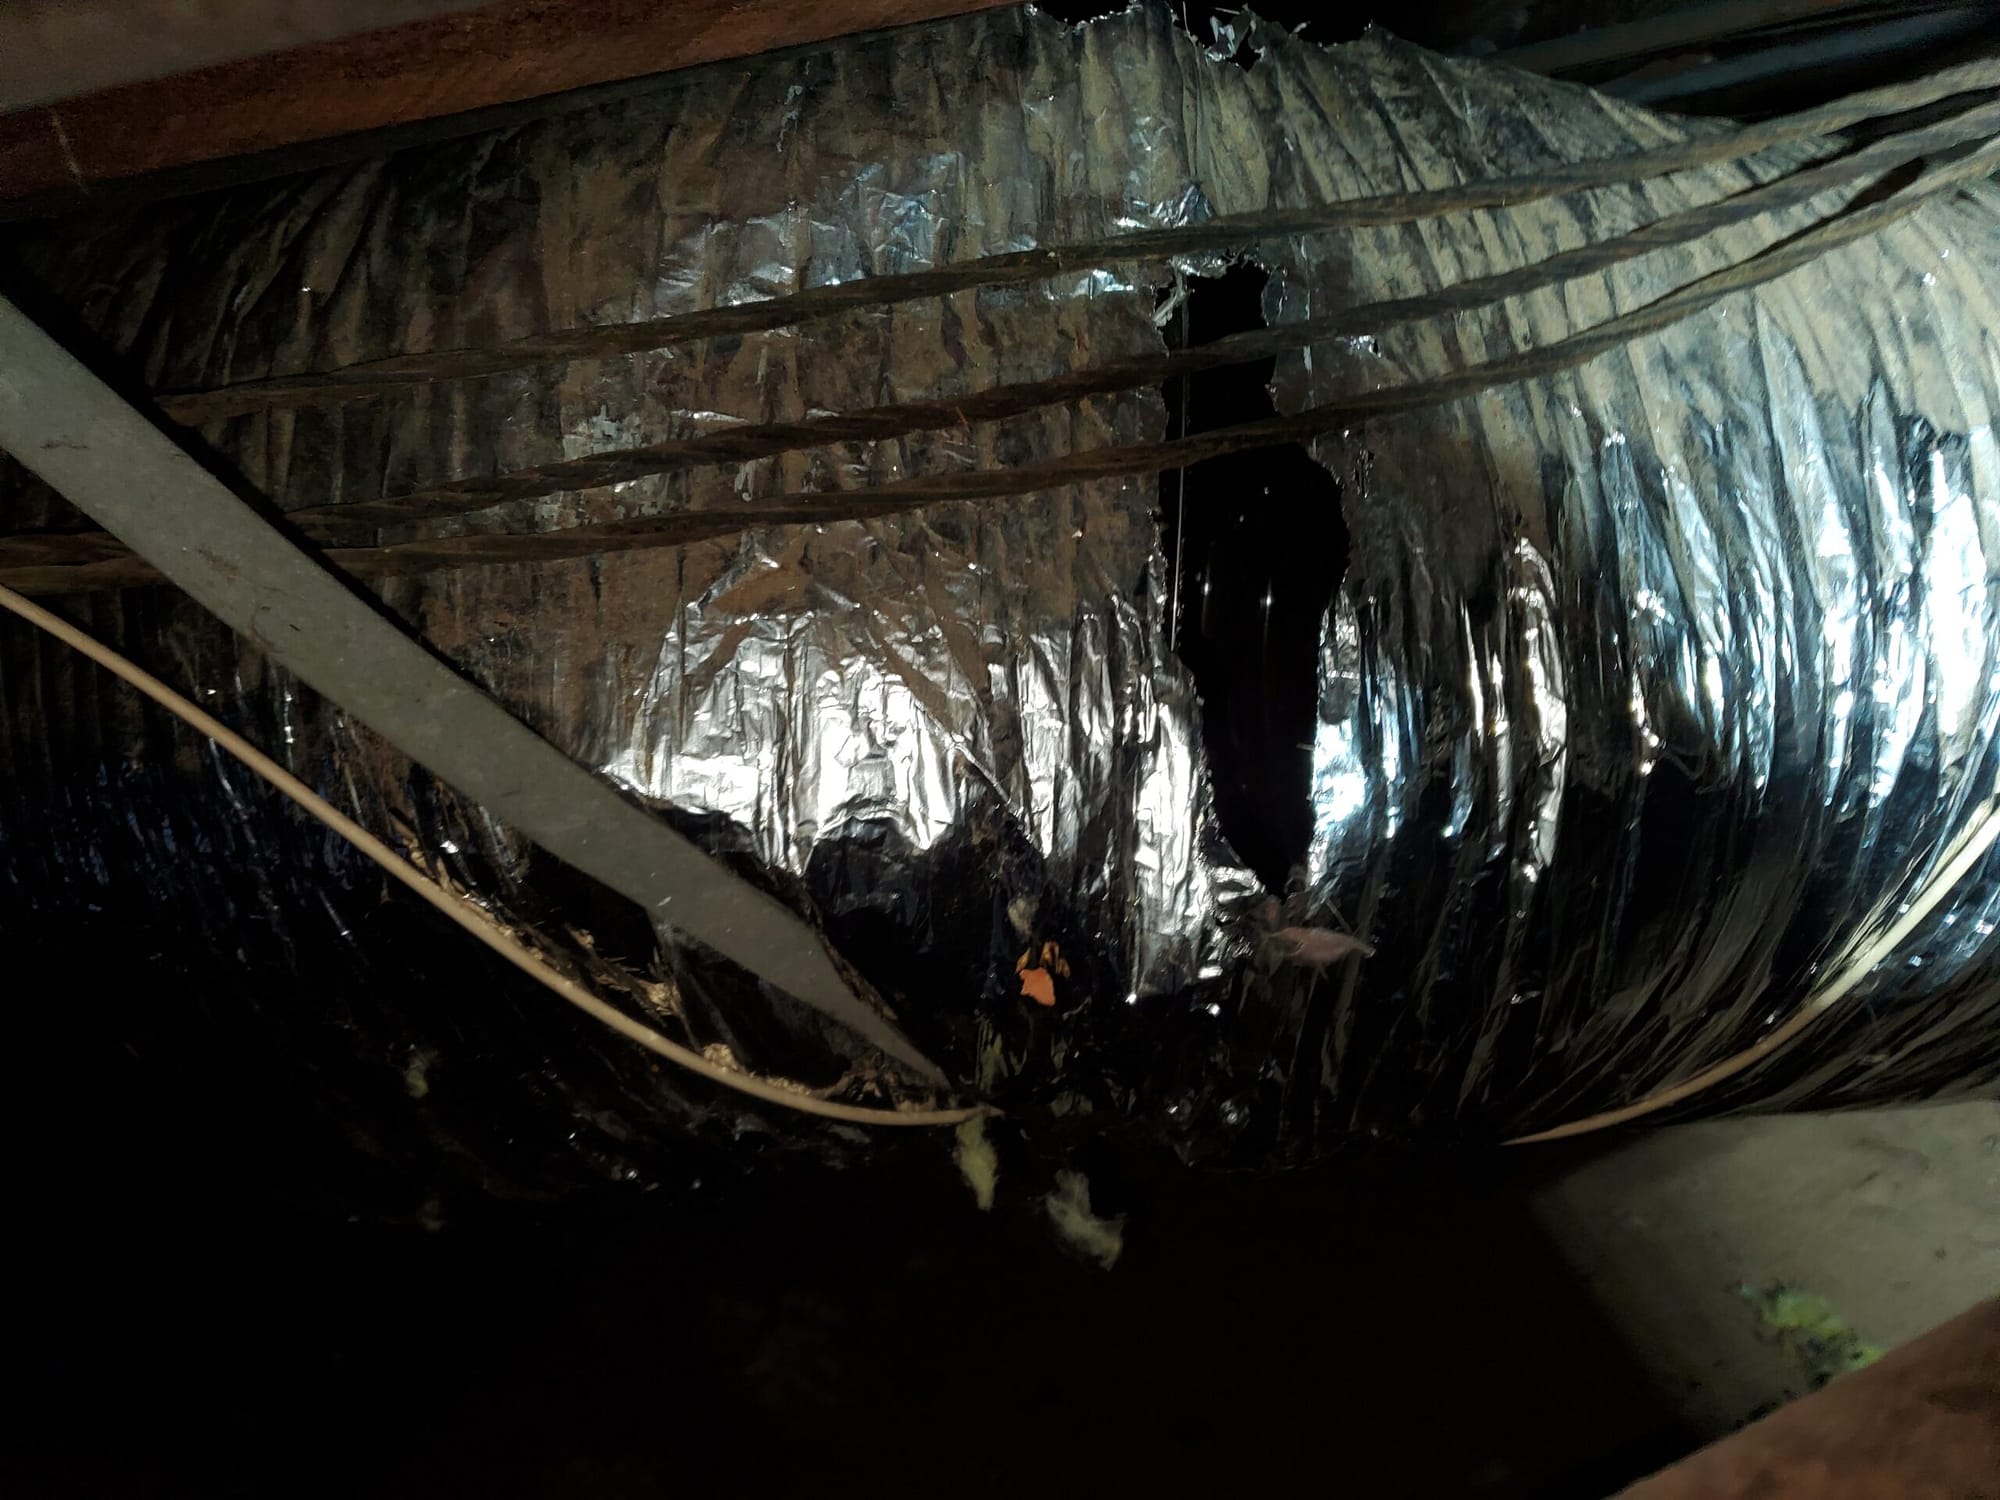 HVAC Duct tear leaking cold air from air conditioning into the attic making the pests comfortable and wasting your utility bill. These types of things get missed by installers, but will not be missed by an Attic Inspection. 